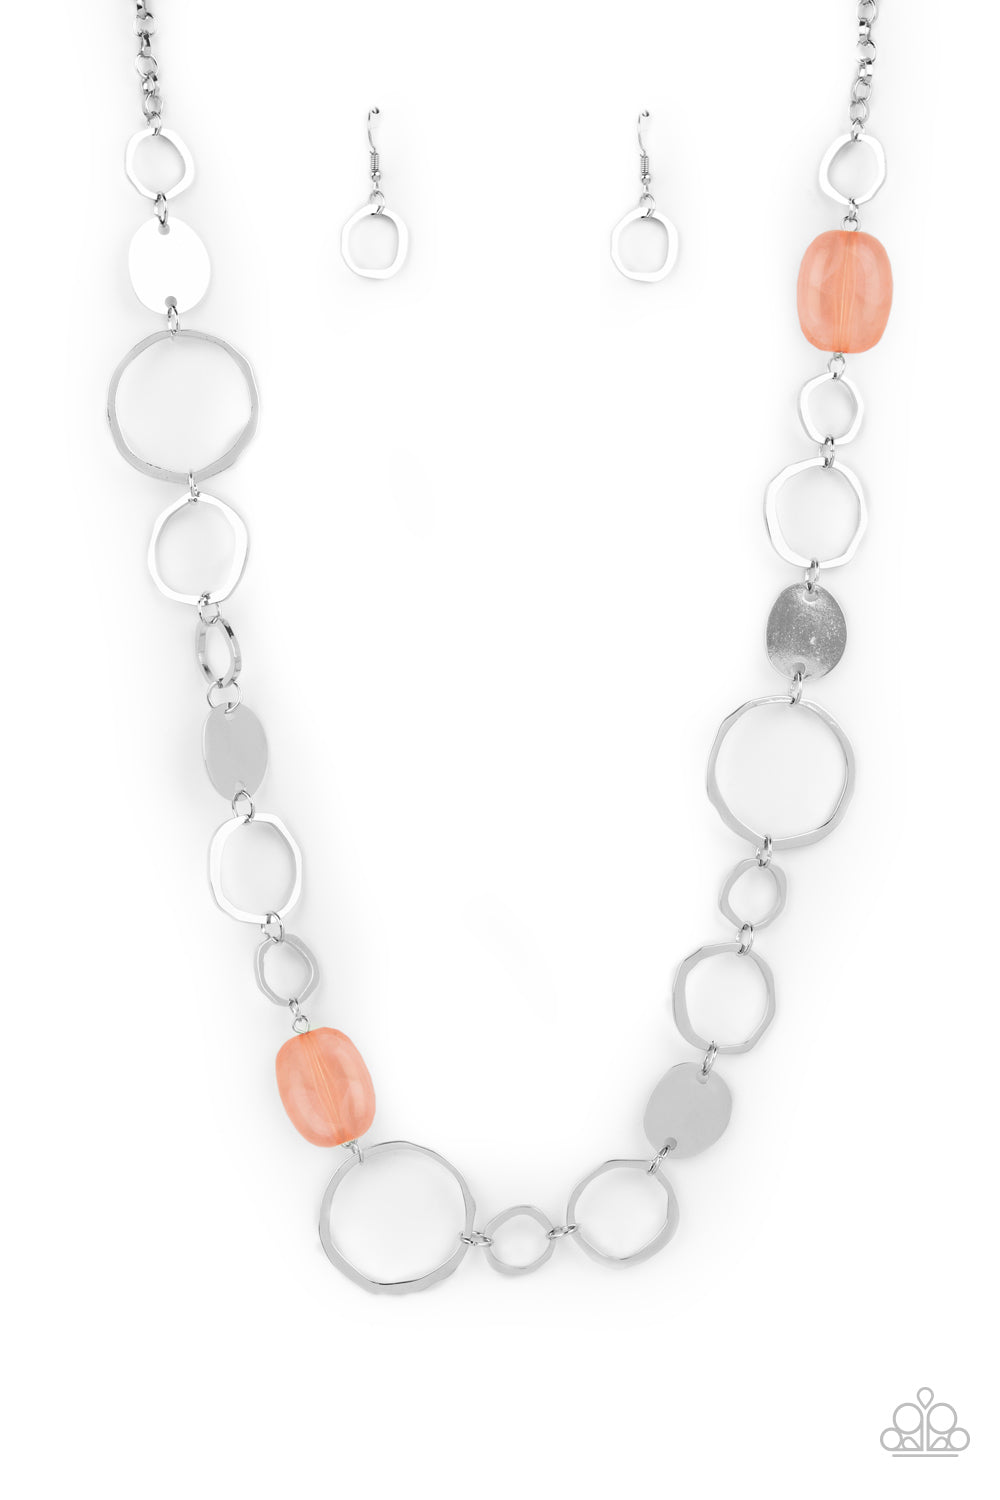 Colorful Combo Orange Necklace - Paparazzi Accessories  Infused with glassy coral accents, a shiny series of asymmetrical hoops and discs delicately link across the chest for a flirty pop of color. Features an adjustable clasp closure.  All Paparazzi Accessories are lead free and nickel free!  Sold as one individual necklace. Includes one pair of matching earrings.